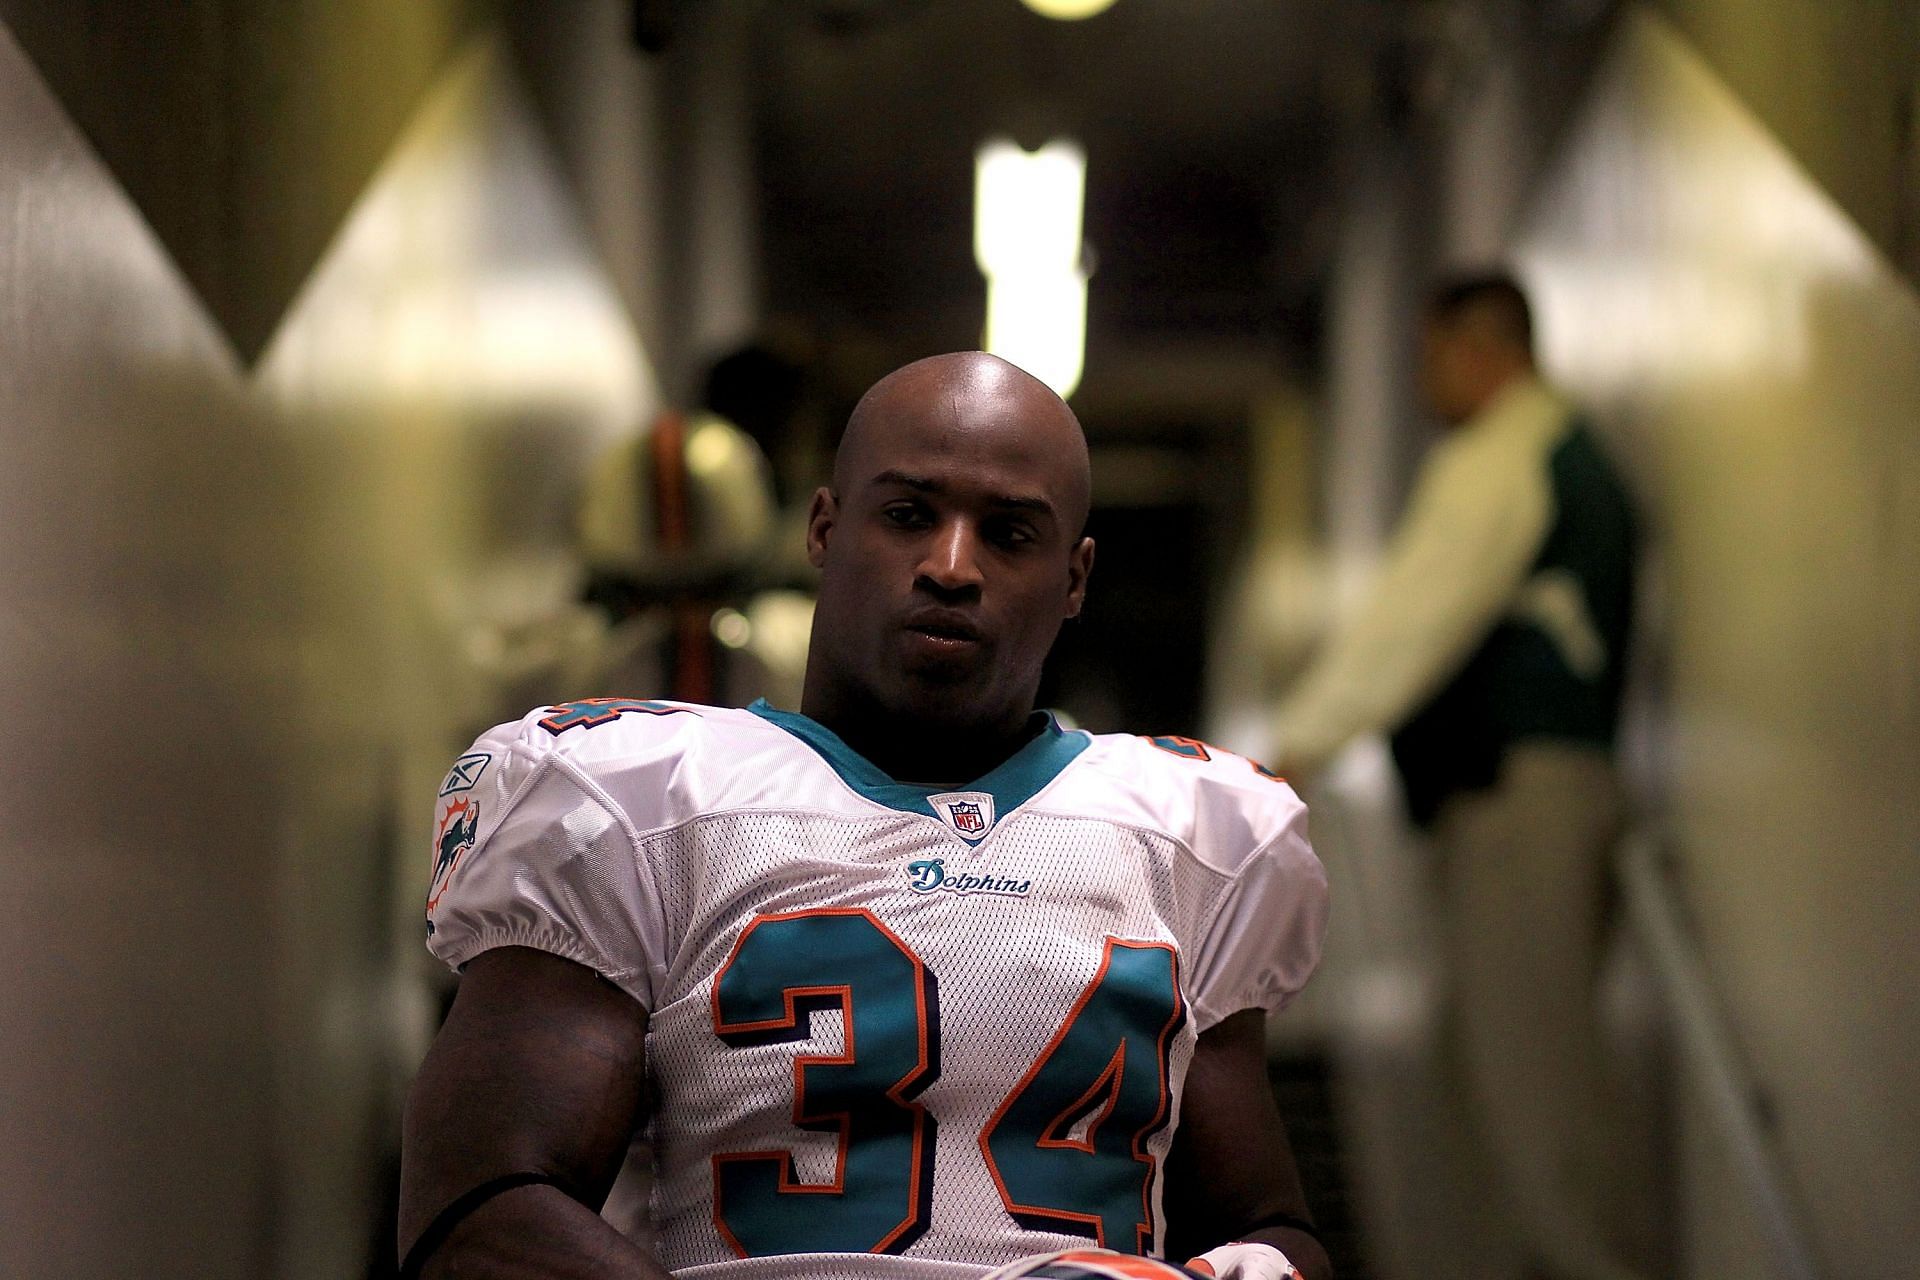 Miami Dolphins running back Ricky Williams